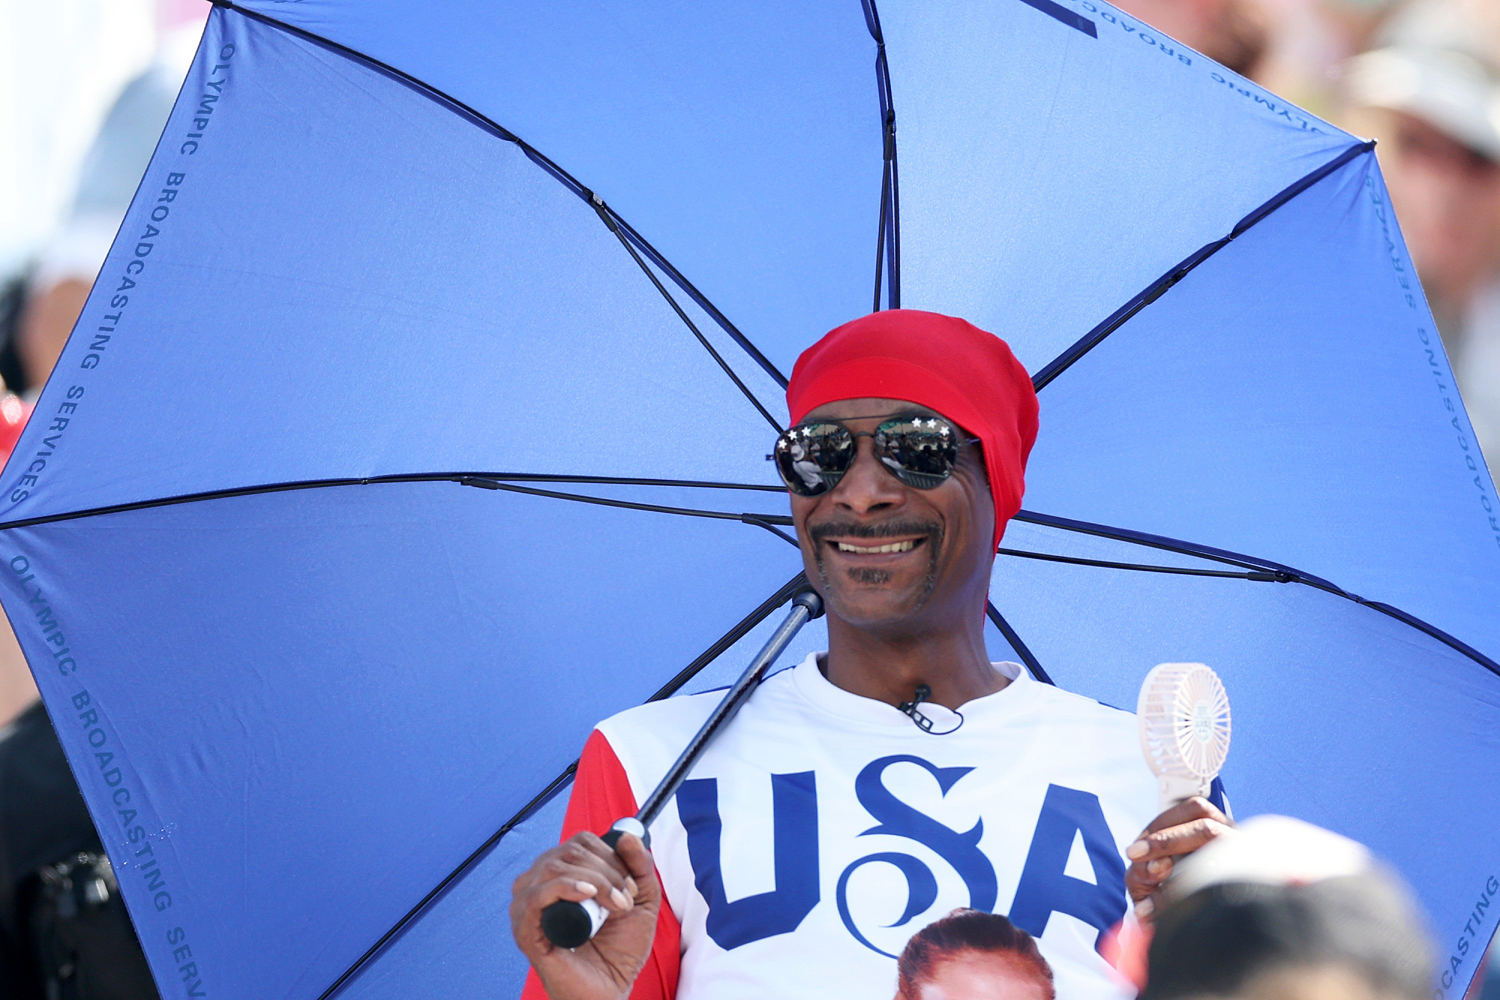 Snoop Dogg declares himself the MVP of the Olympics after traveling with U.S. men's basketball team